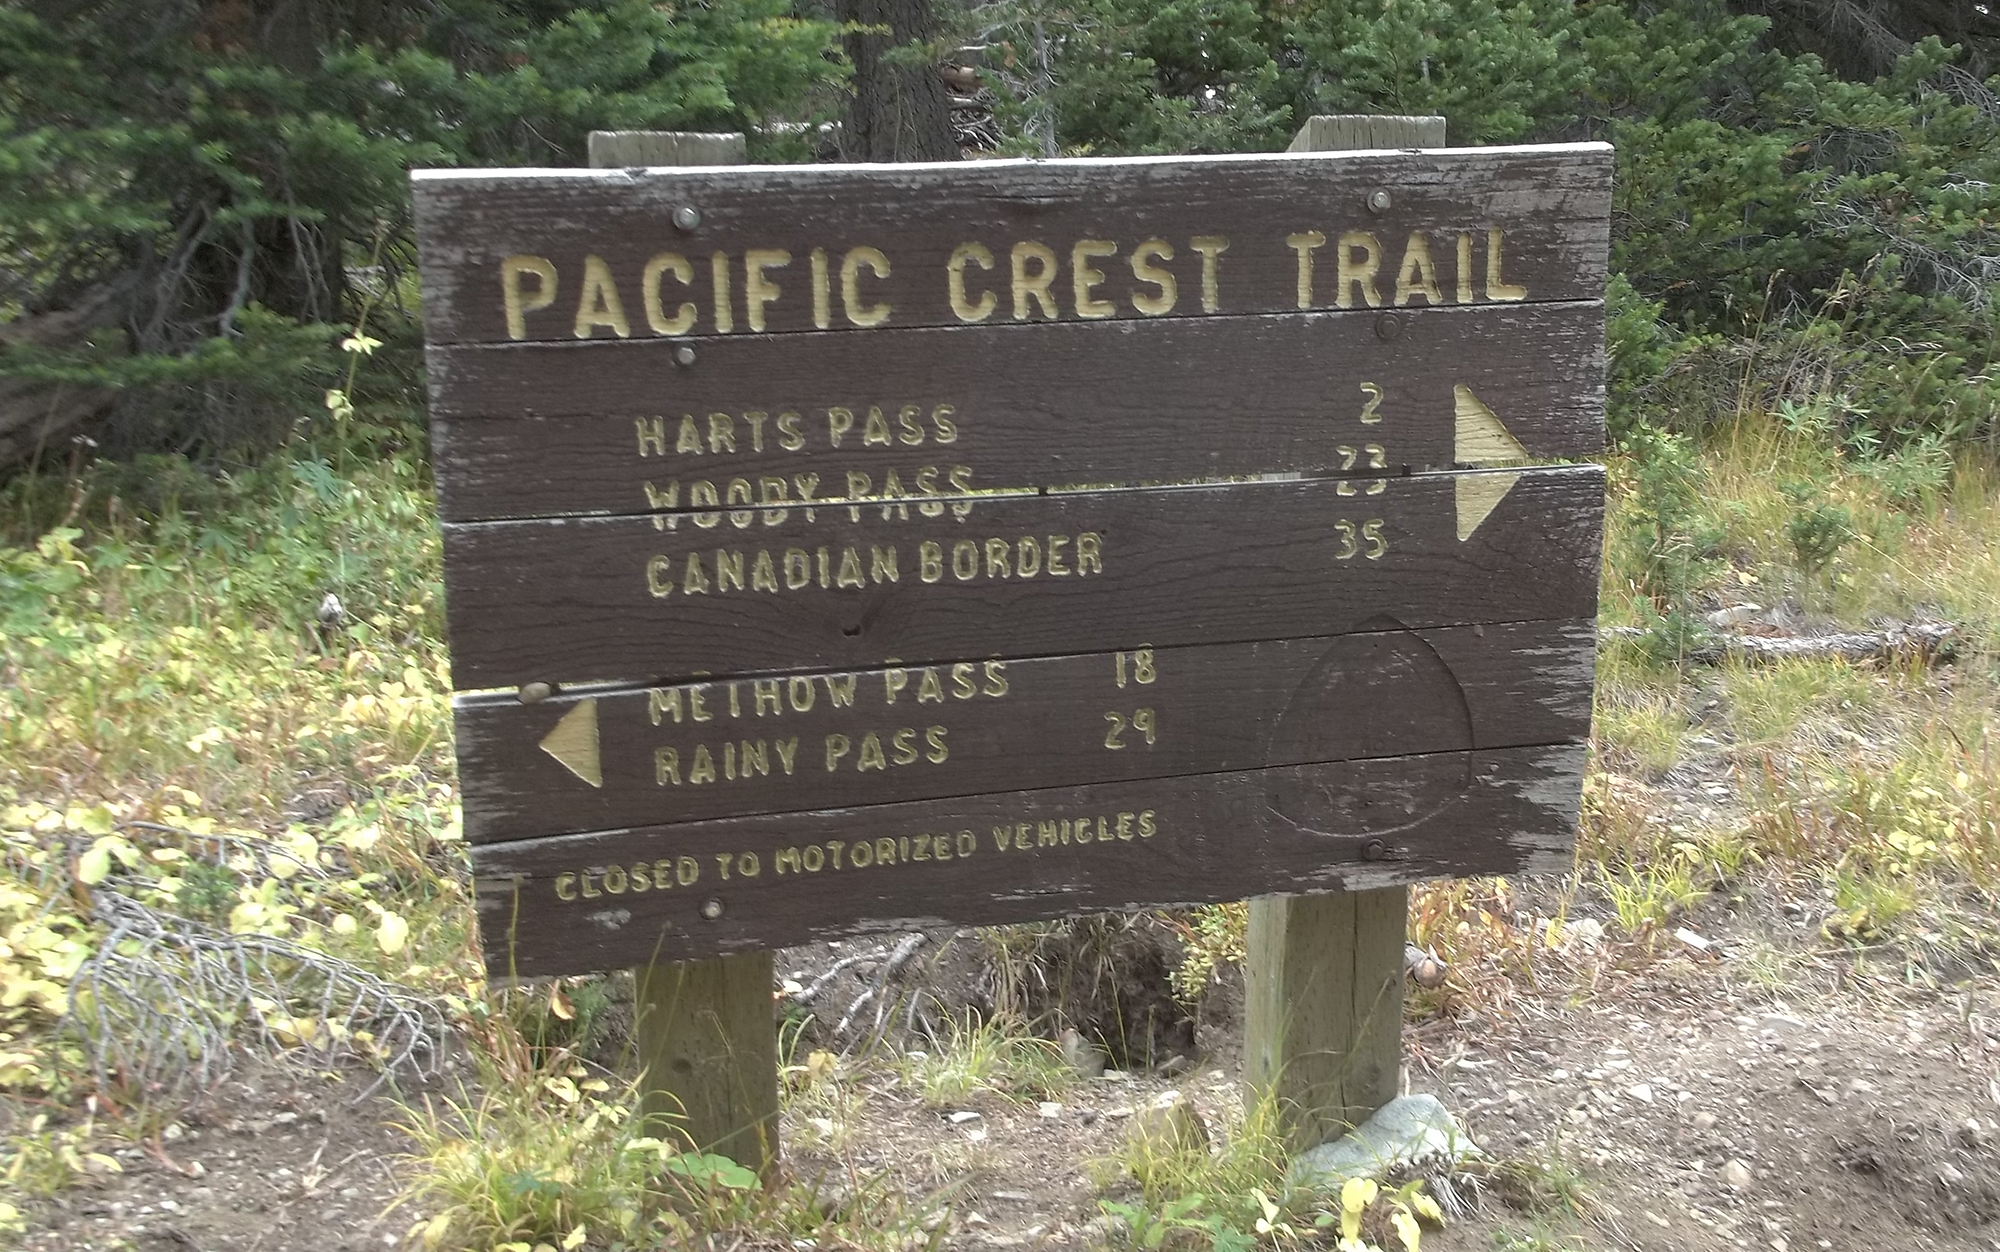 All good things come to an endâeven a 2,600-mile Pacific Crest Trail thru-hike.